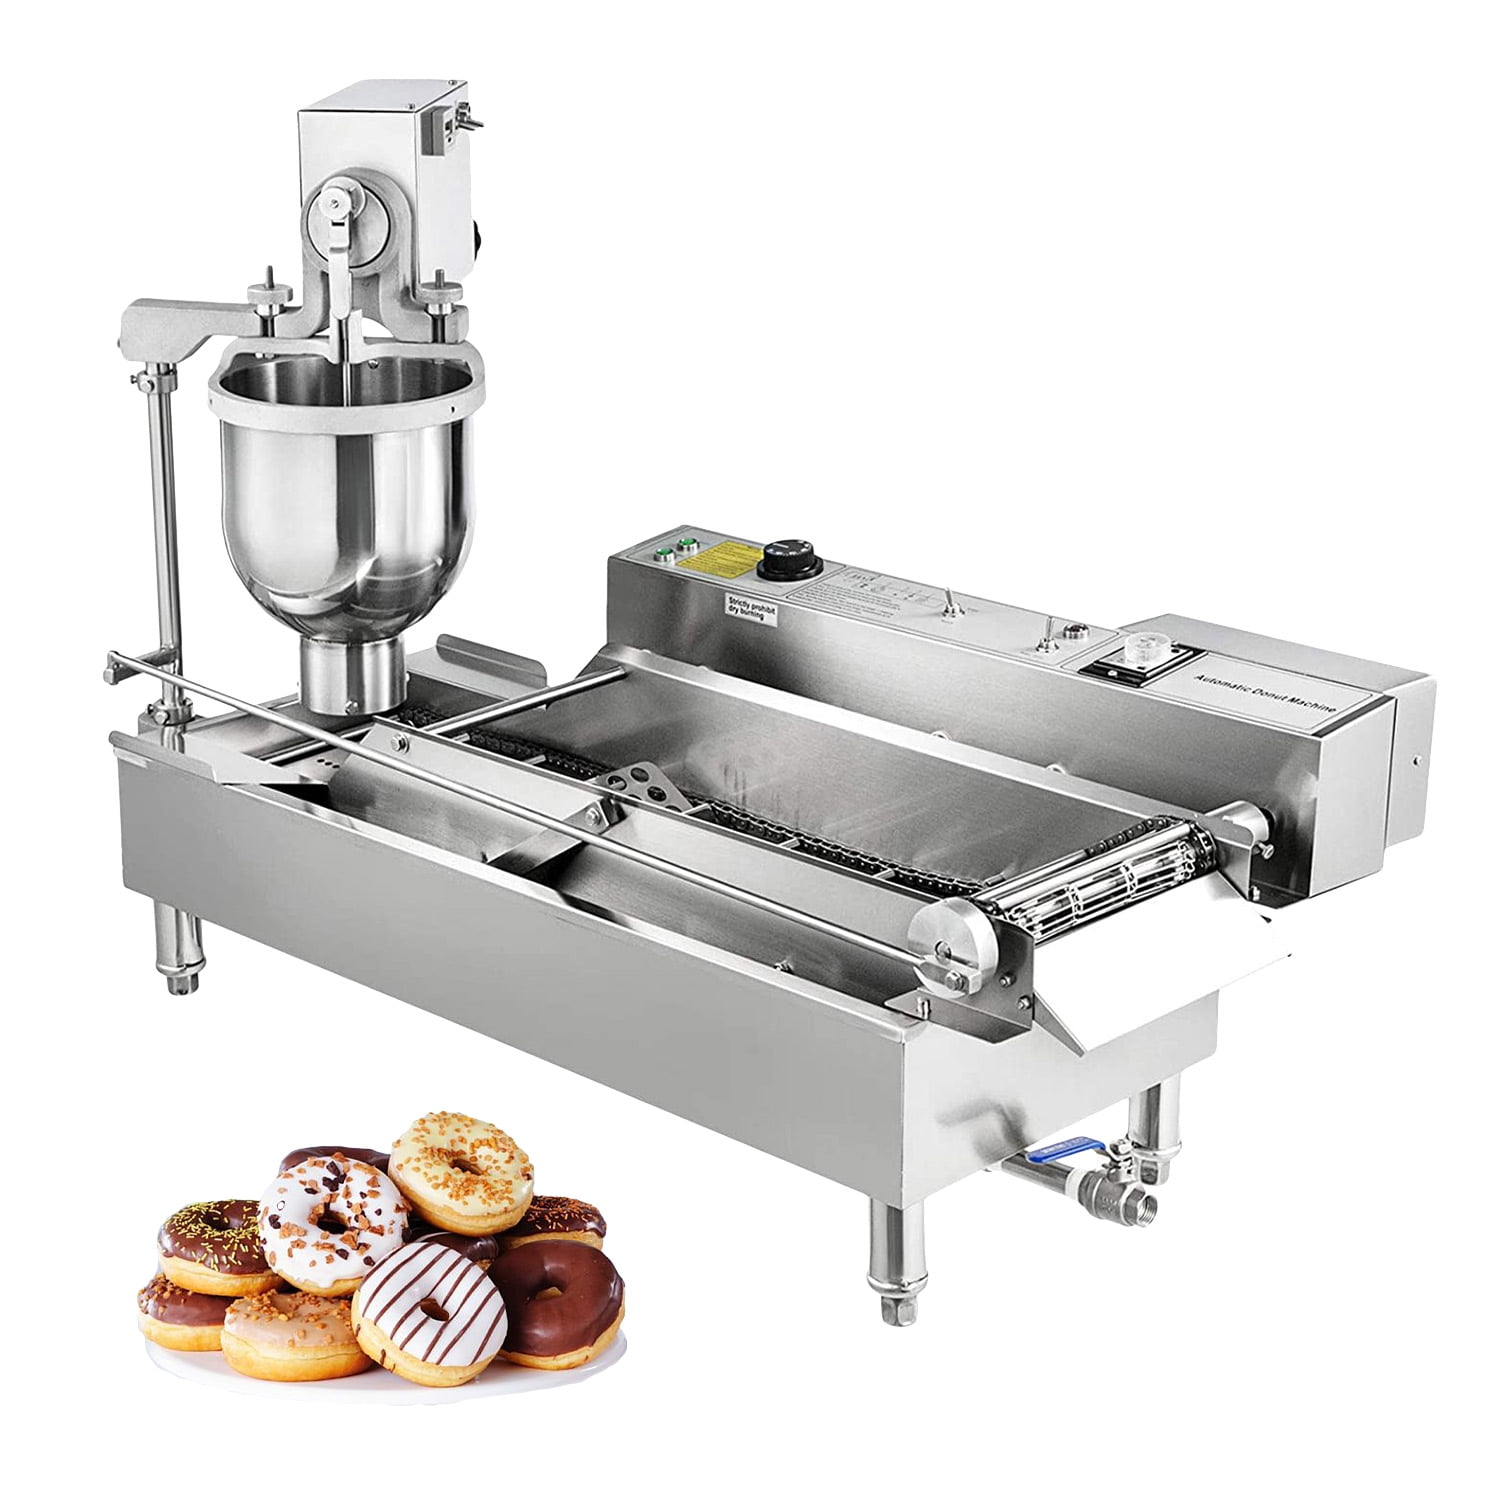 Mini Donut Machine,15 Pieces Commercial Electric Mini Round Donut Machine Nonstick Baker Electric Doughnut Maker 110V USA STOCK 